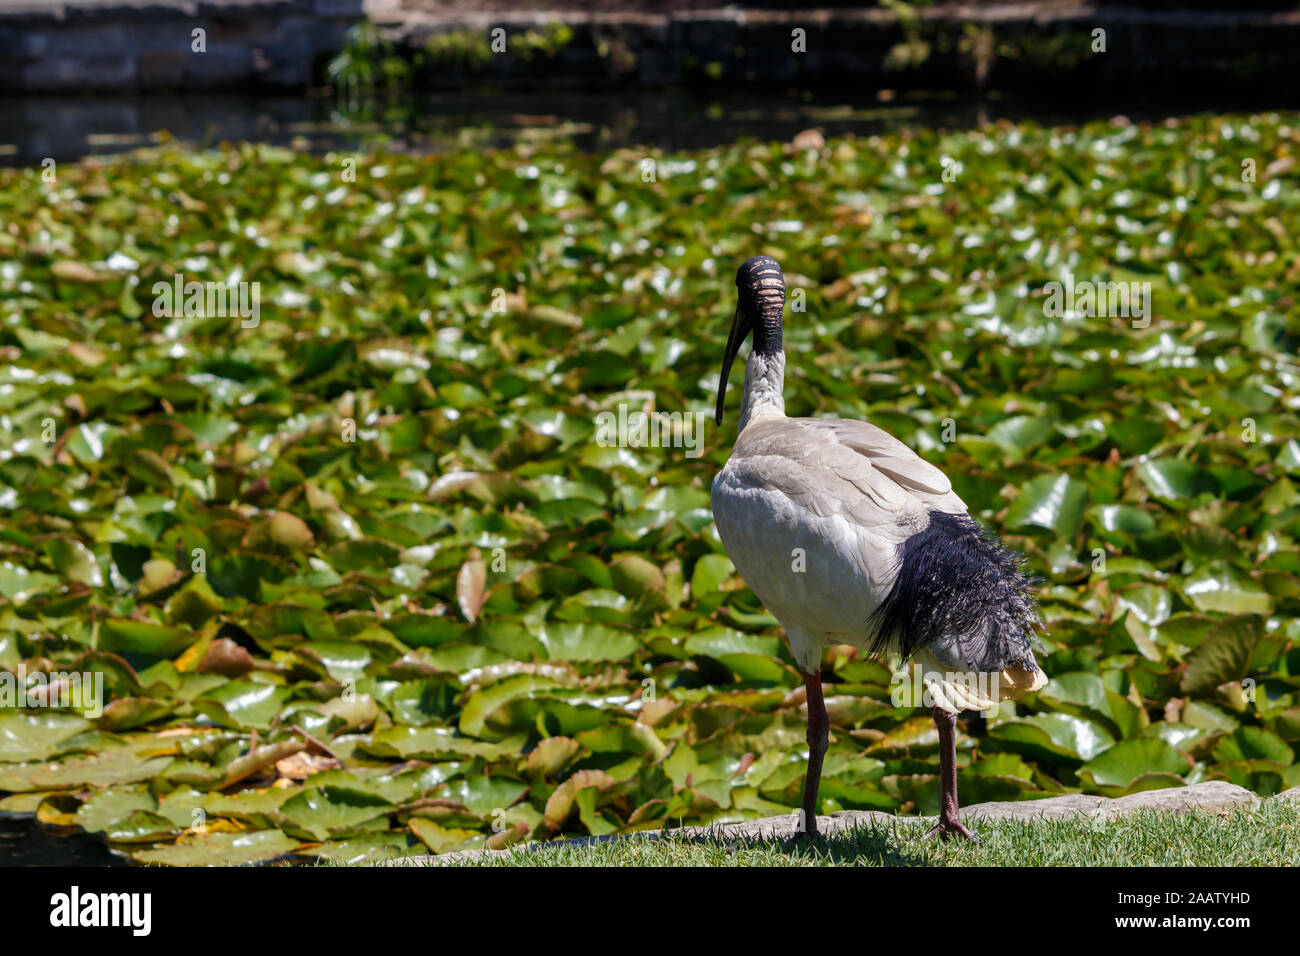 Black and White Australian White Ibis standing near lily covered pond Stock Photo